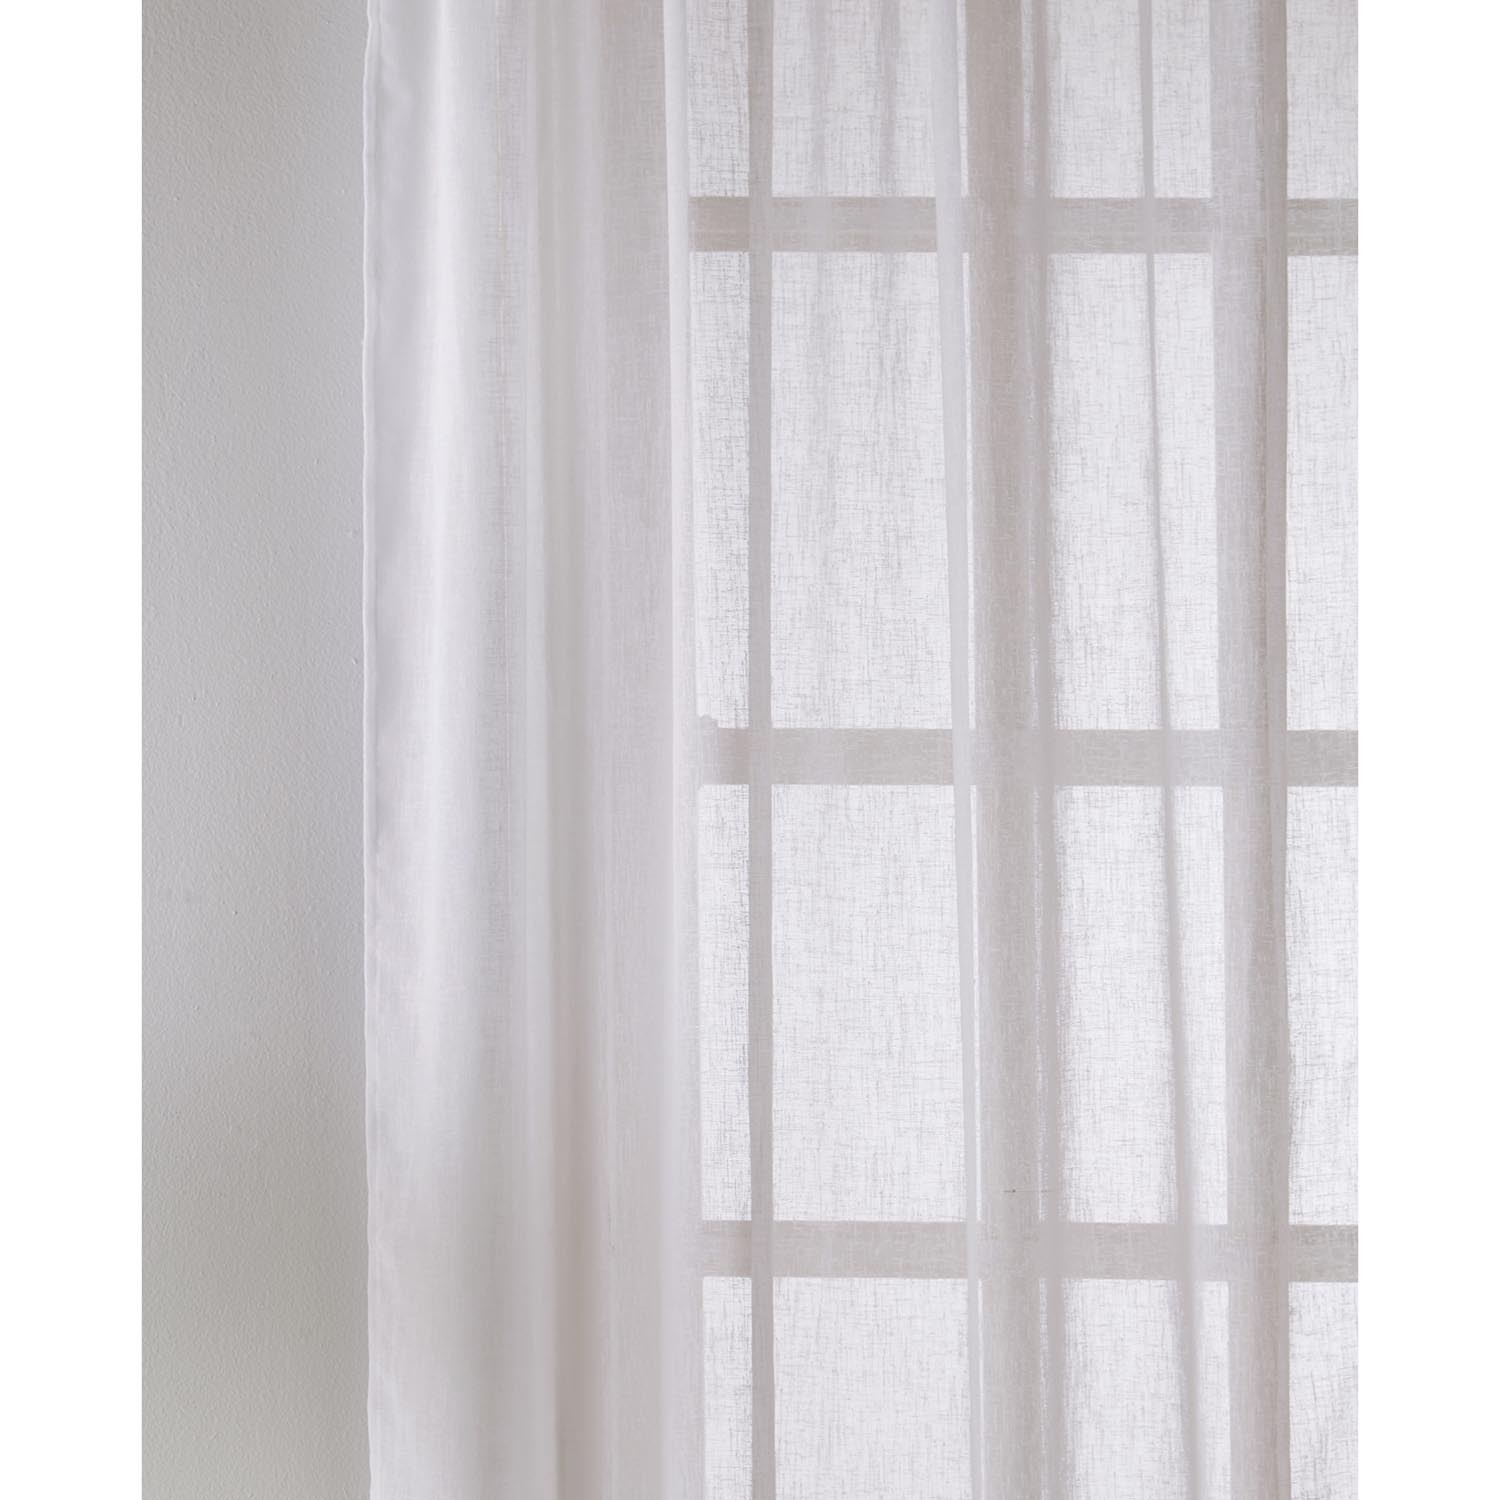 Eden Recycled Textured Voile - White / 137cm Image 2